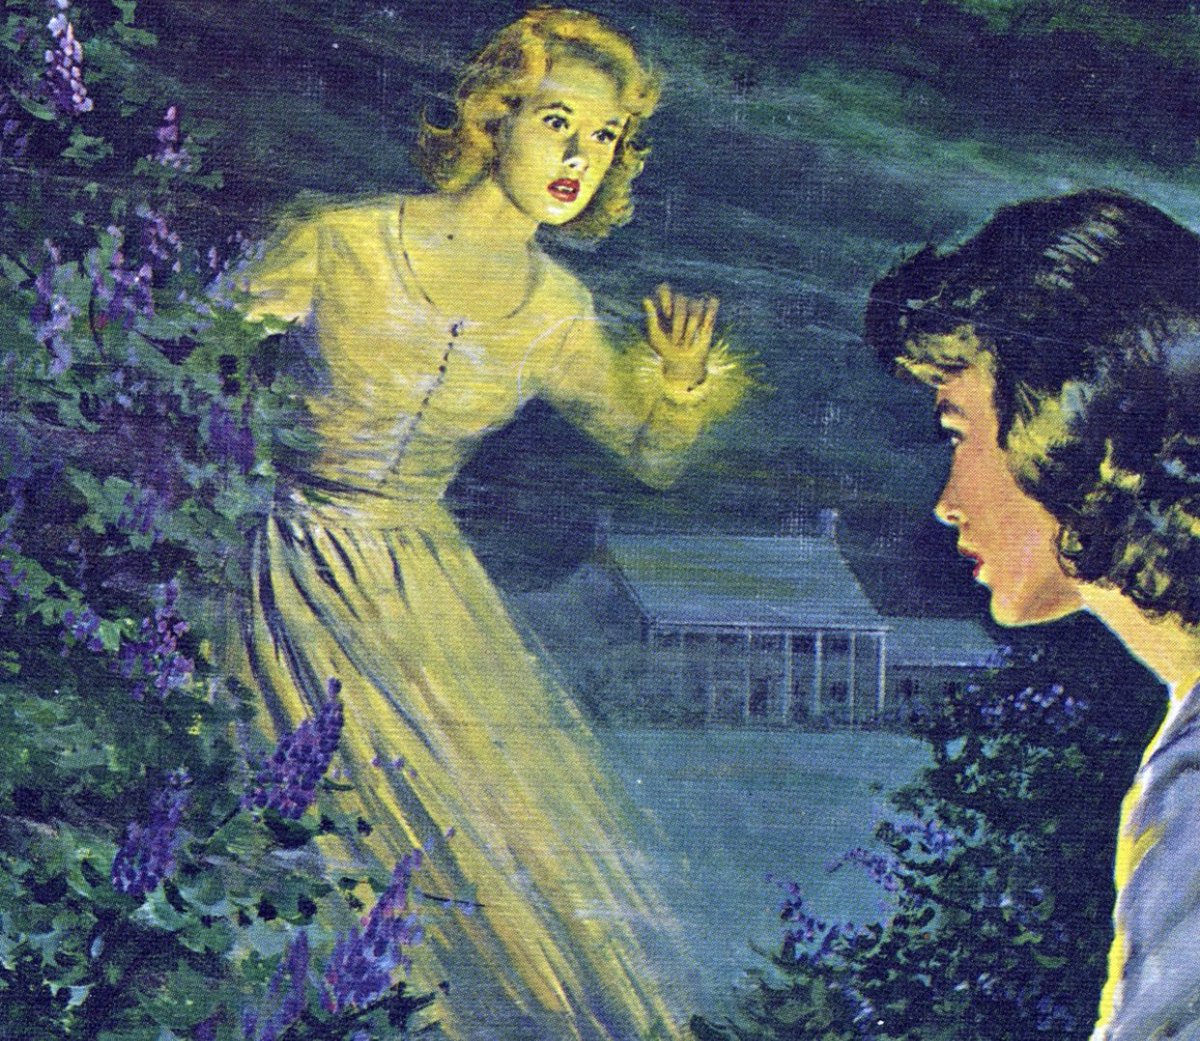 Suddenly she saw a flickering light ahead, near the grove. Curious, she drew closer. A veiled figure wearing a glowing white gown confronted her. Mystery at Lilac Inn (Nancy Drew) by Mildren Wirt, ghost writer for “Carolyn Keene” #BookWormGhost